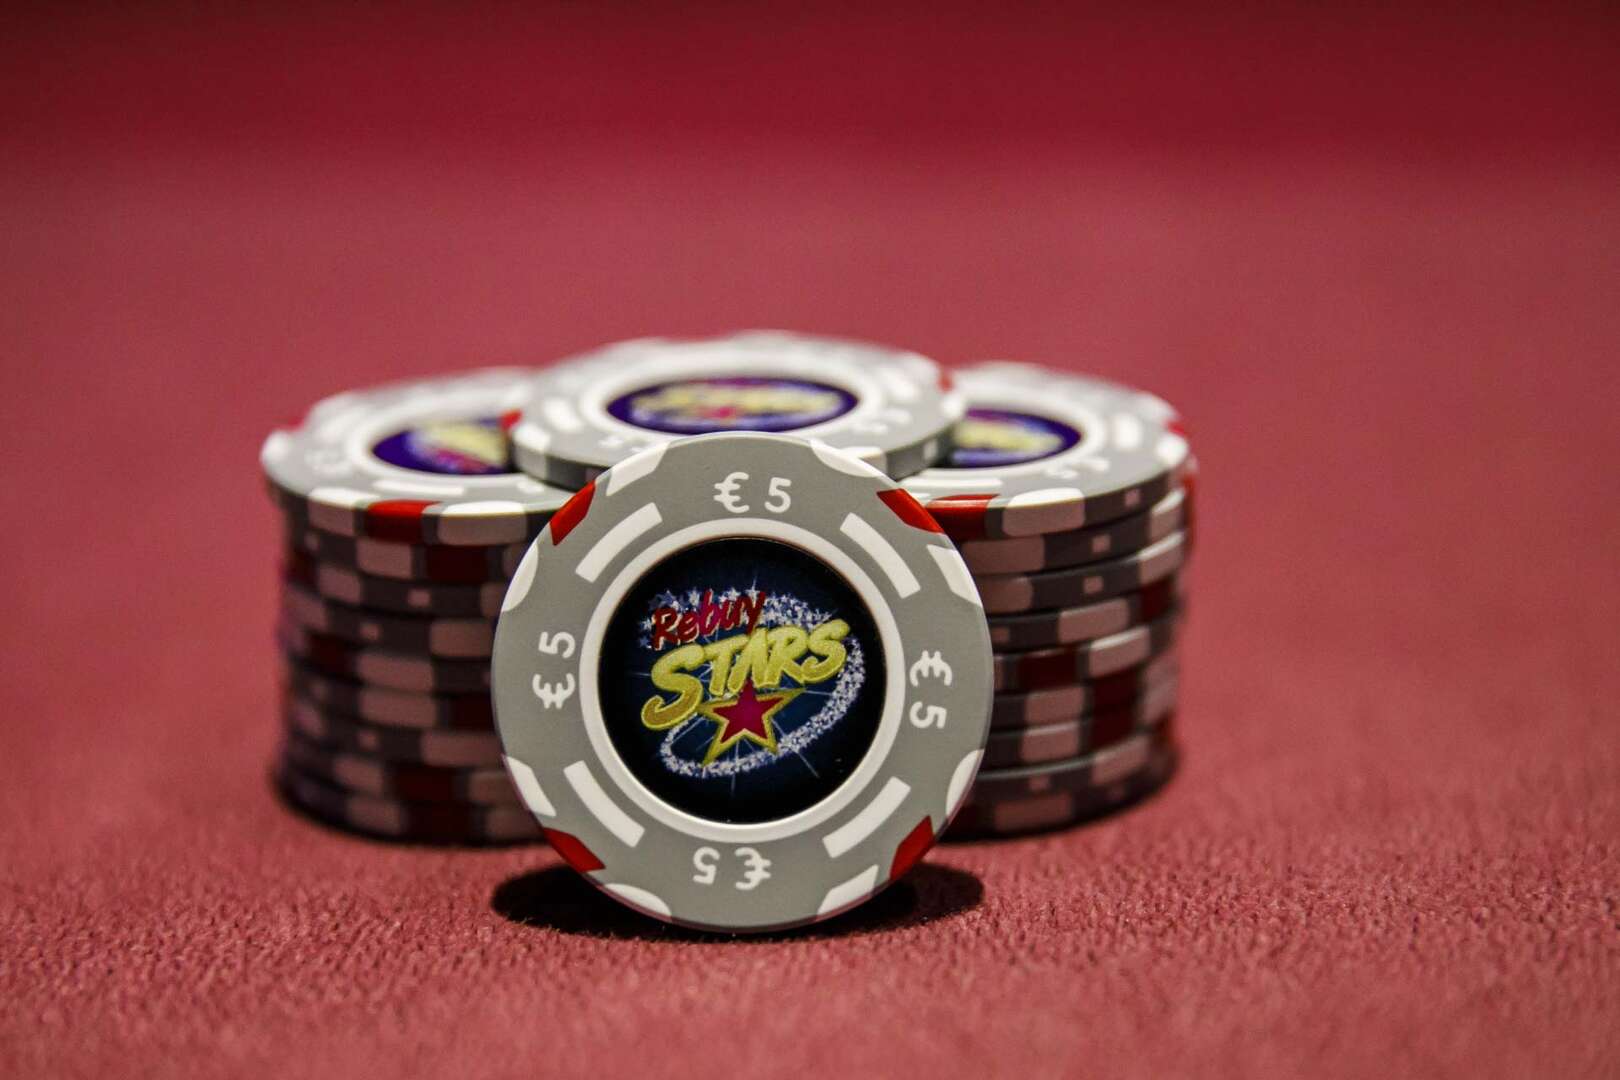 Poker November will end with a juicy cash game and €6,000 guarantee